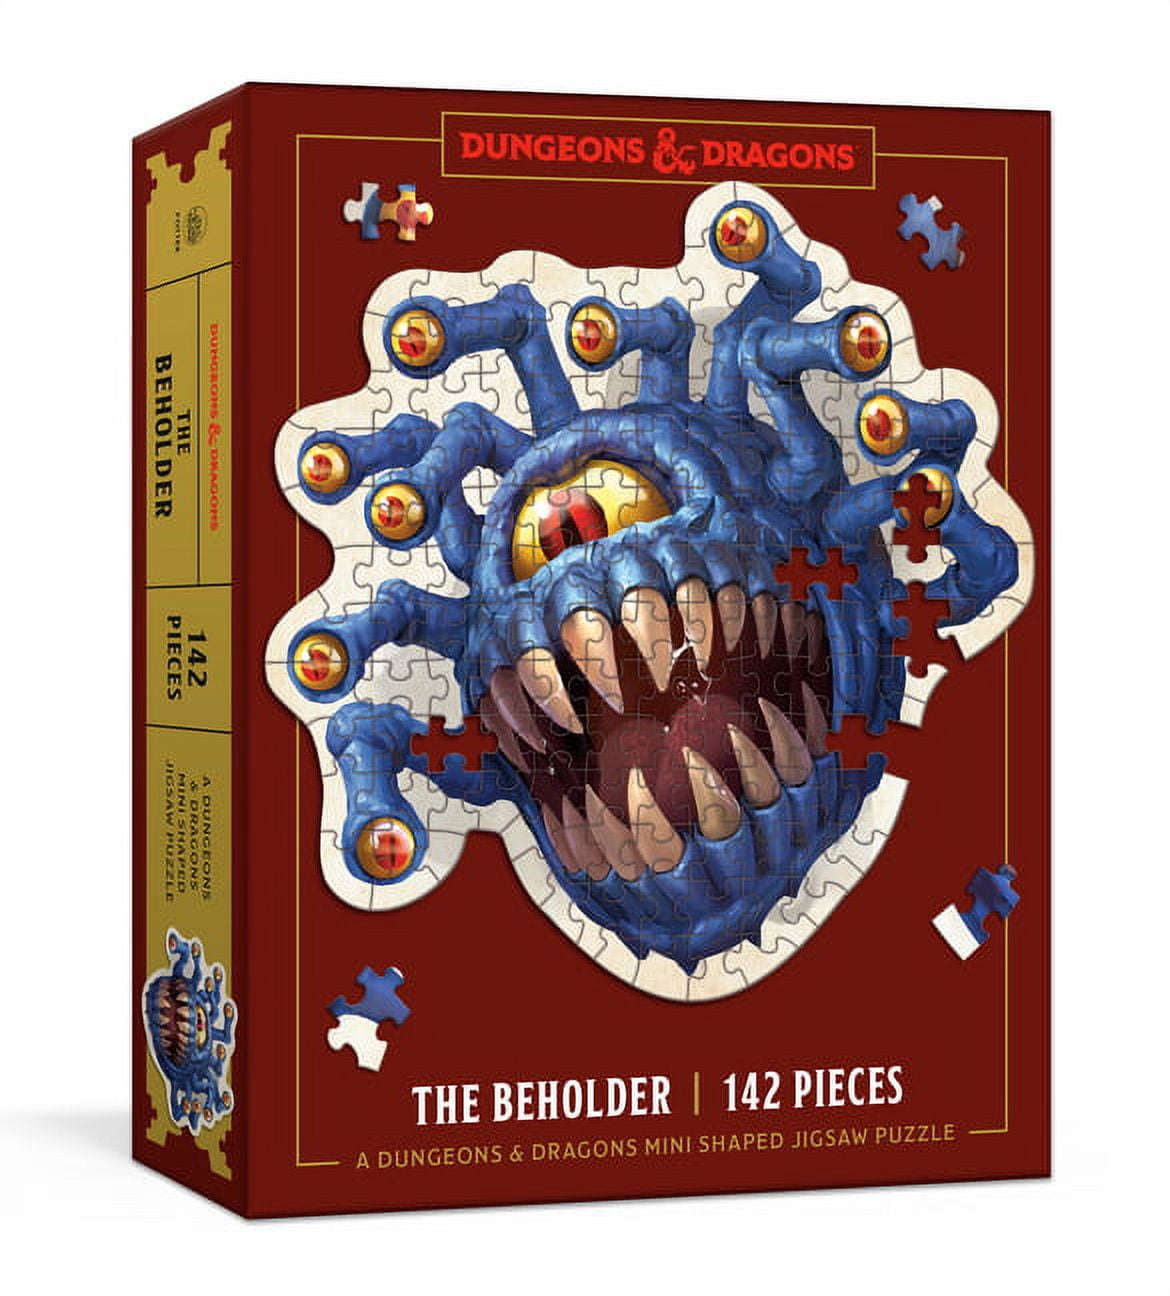 ISBN 9780593580707 product image for RAN80707 Dungeons & Dragons Mini Shaped Beholder Puzzle, 142 Piece | upcitemdb.com